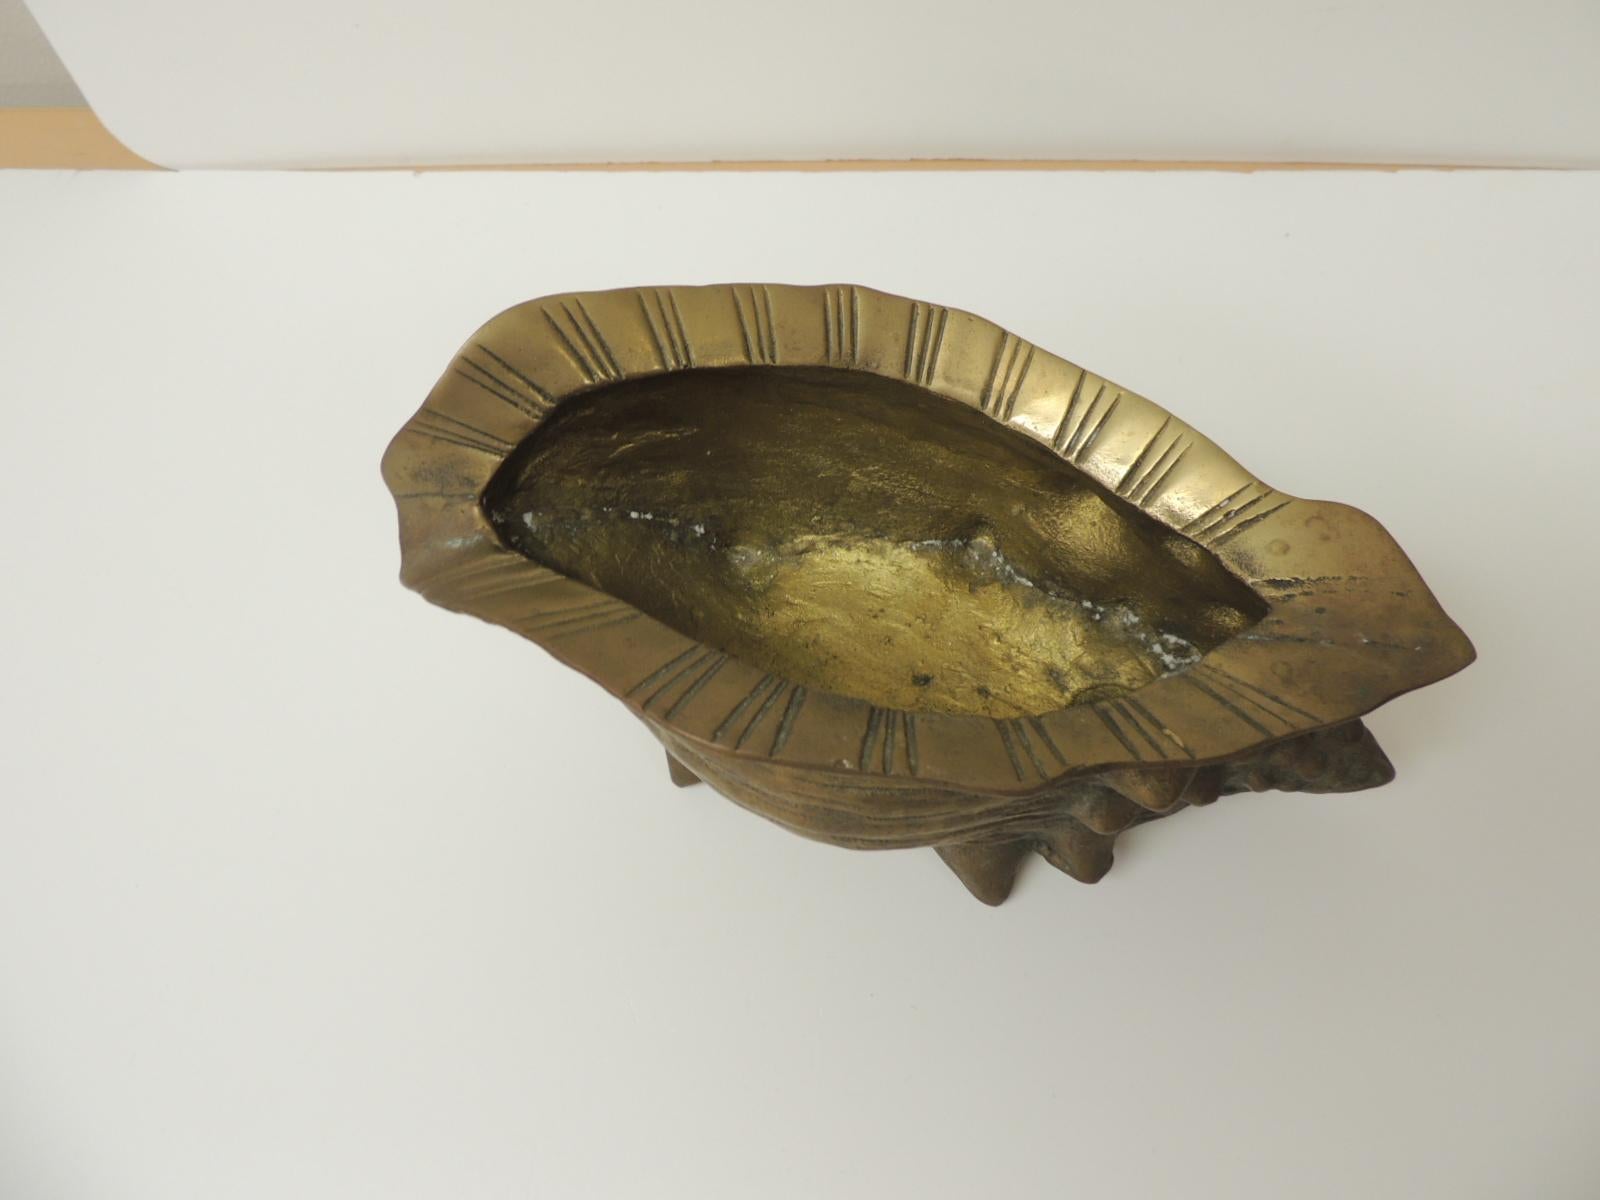 Large vintage brass sea shell planter. Nice details of the shell all around.
Size: 10 x 4 x 5.